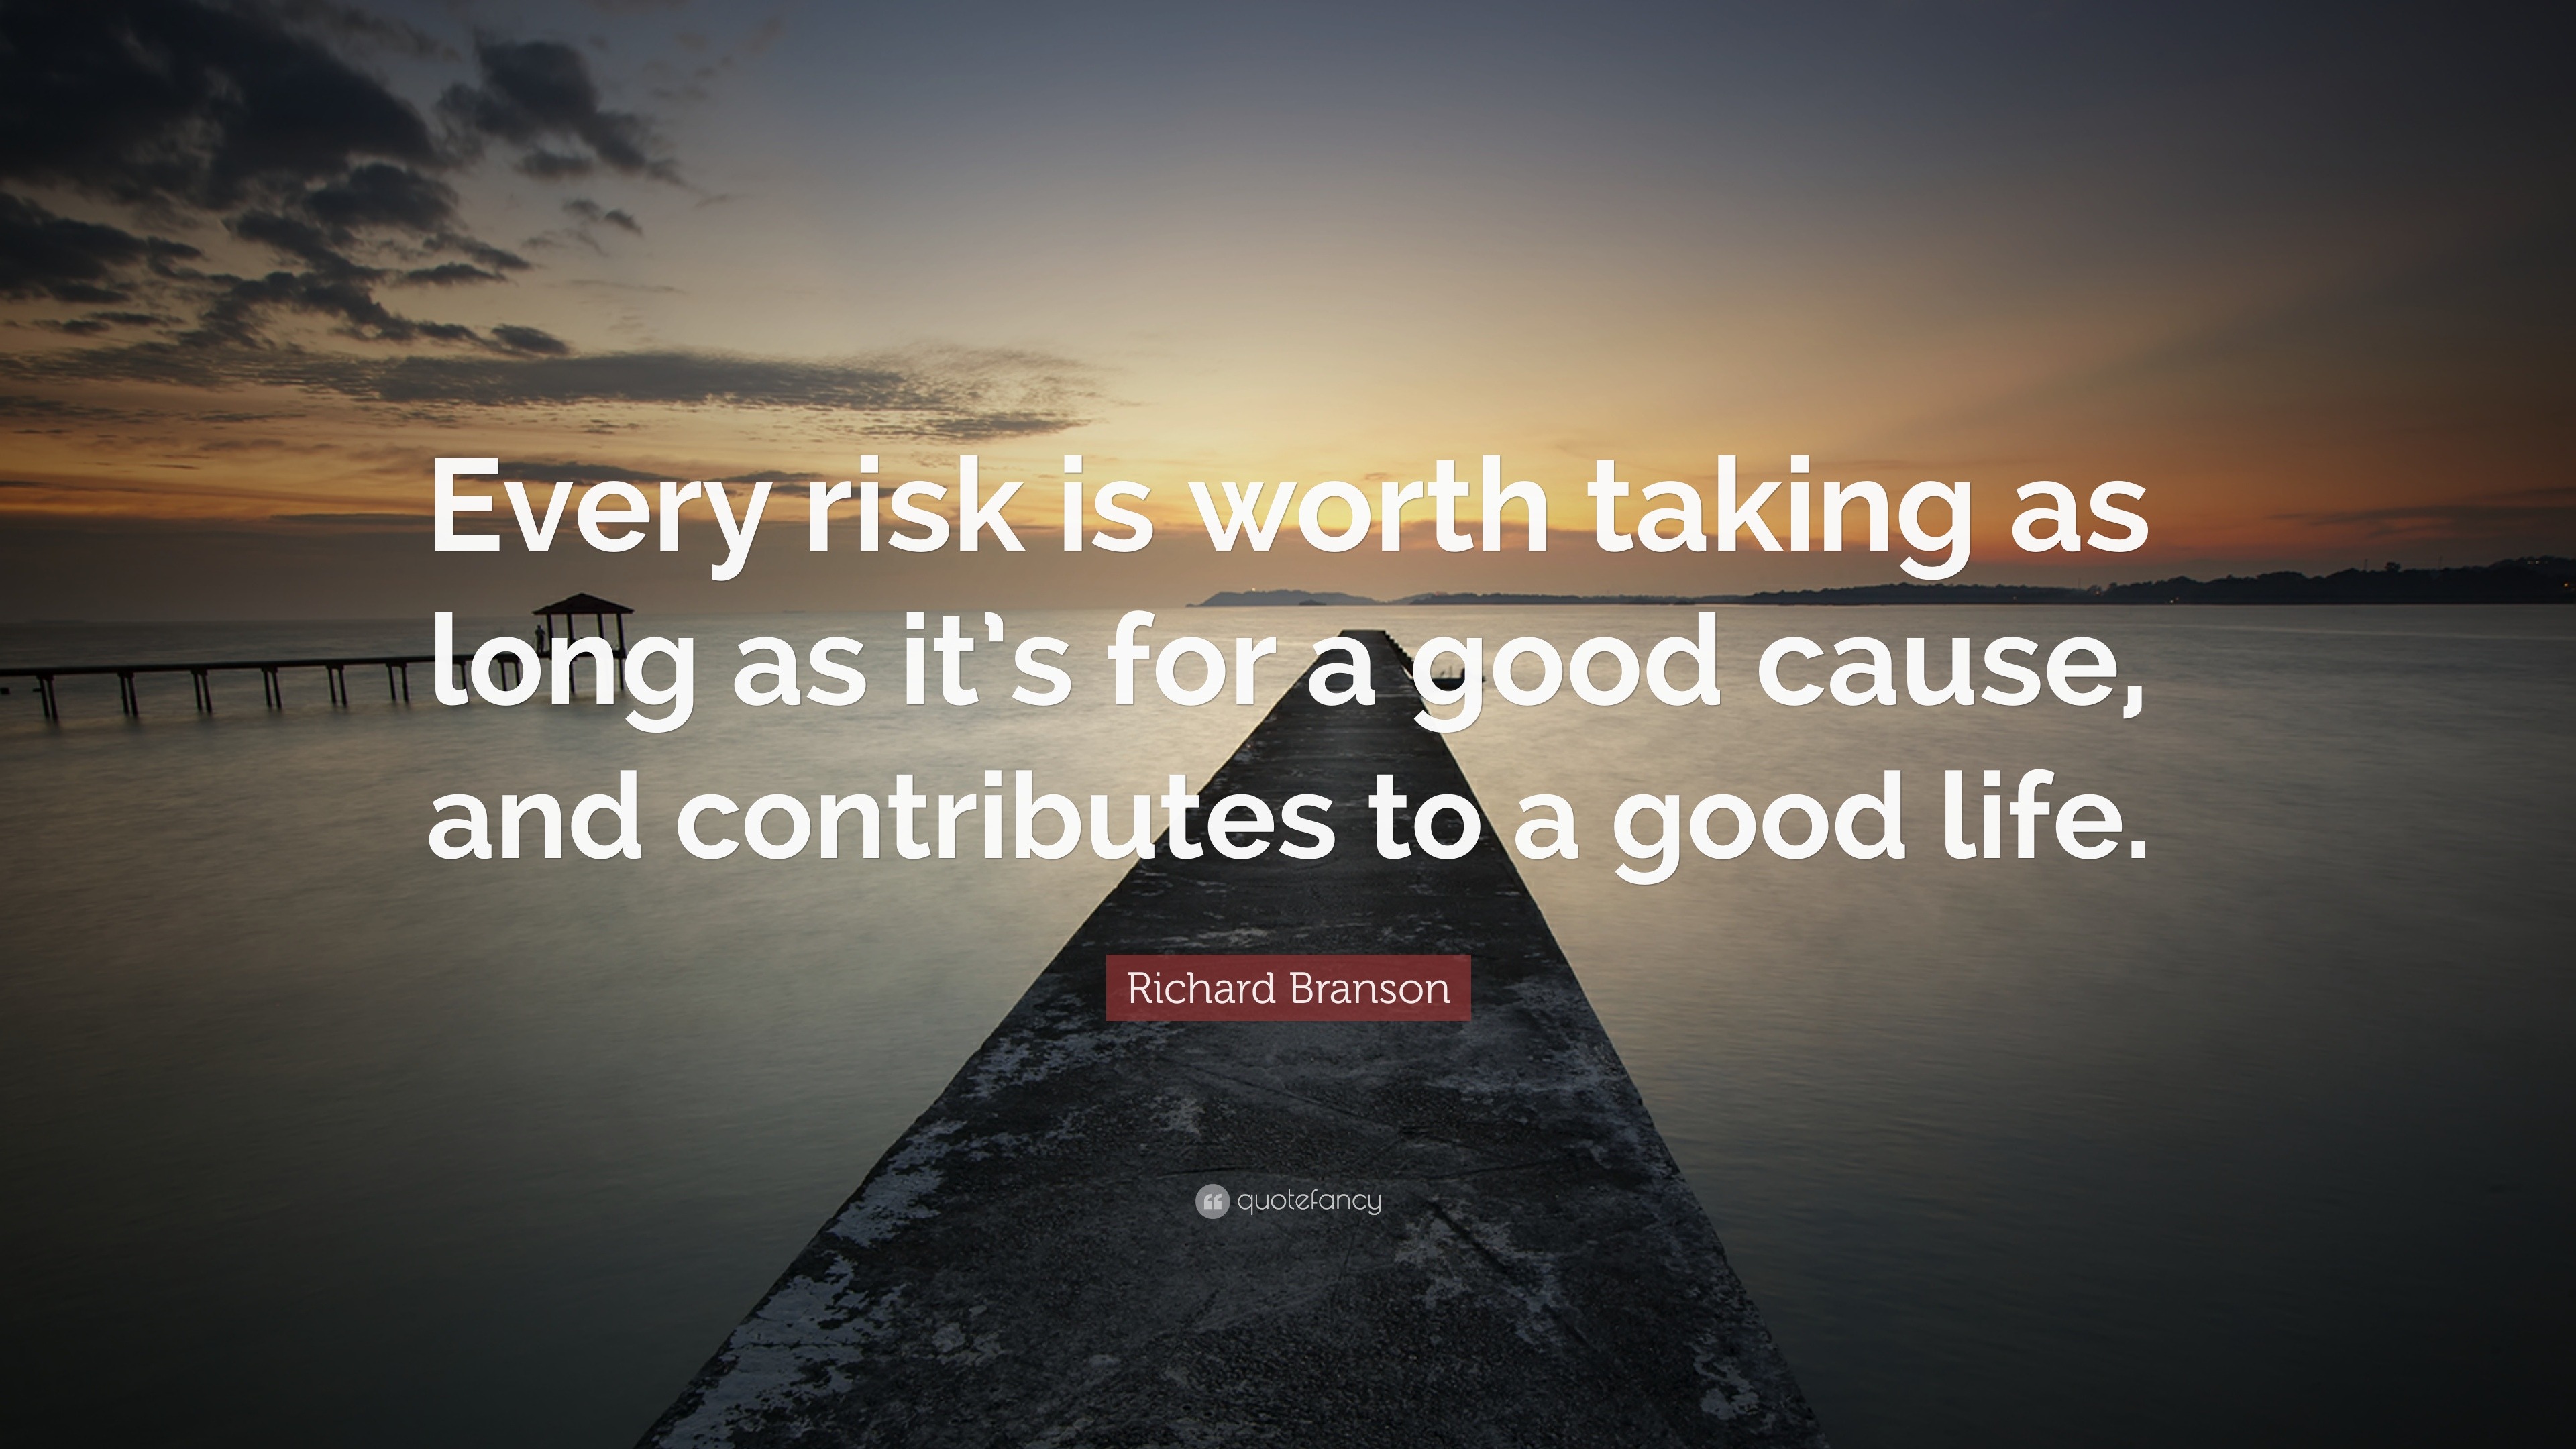 Richard Branson Quote: “Every risk is worth taking as long as it’s for